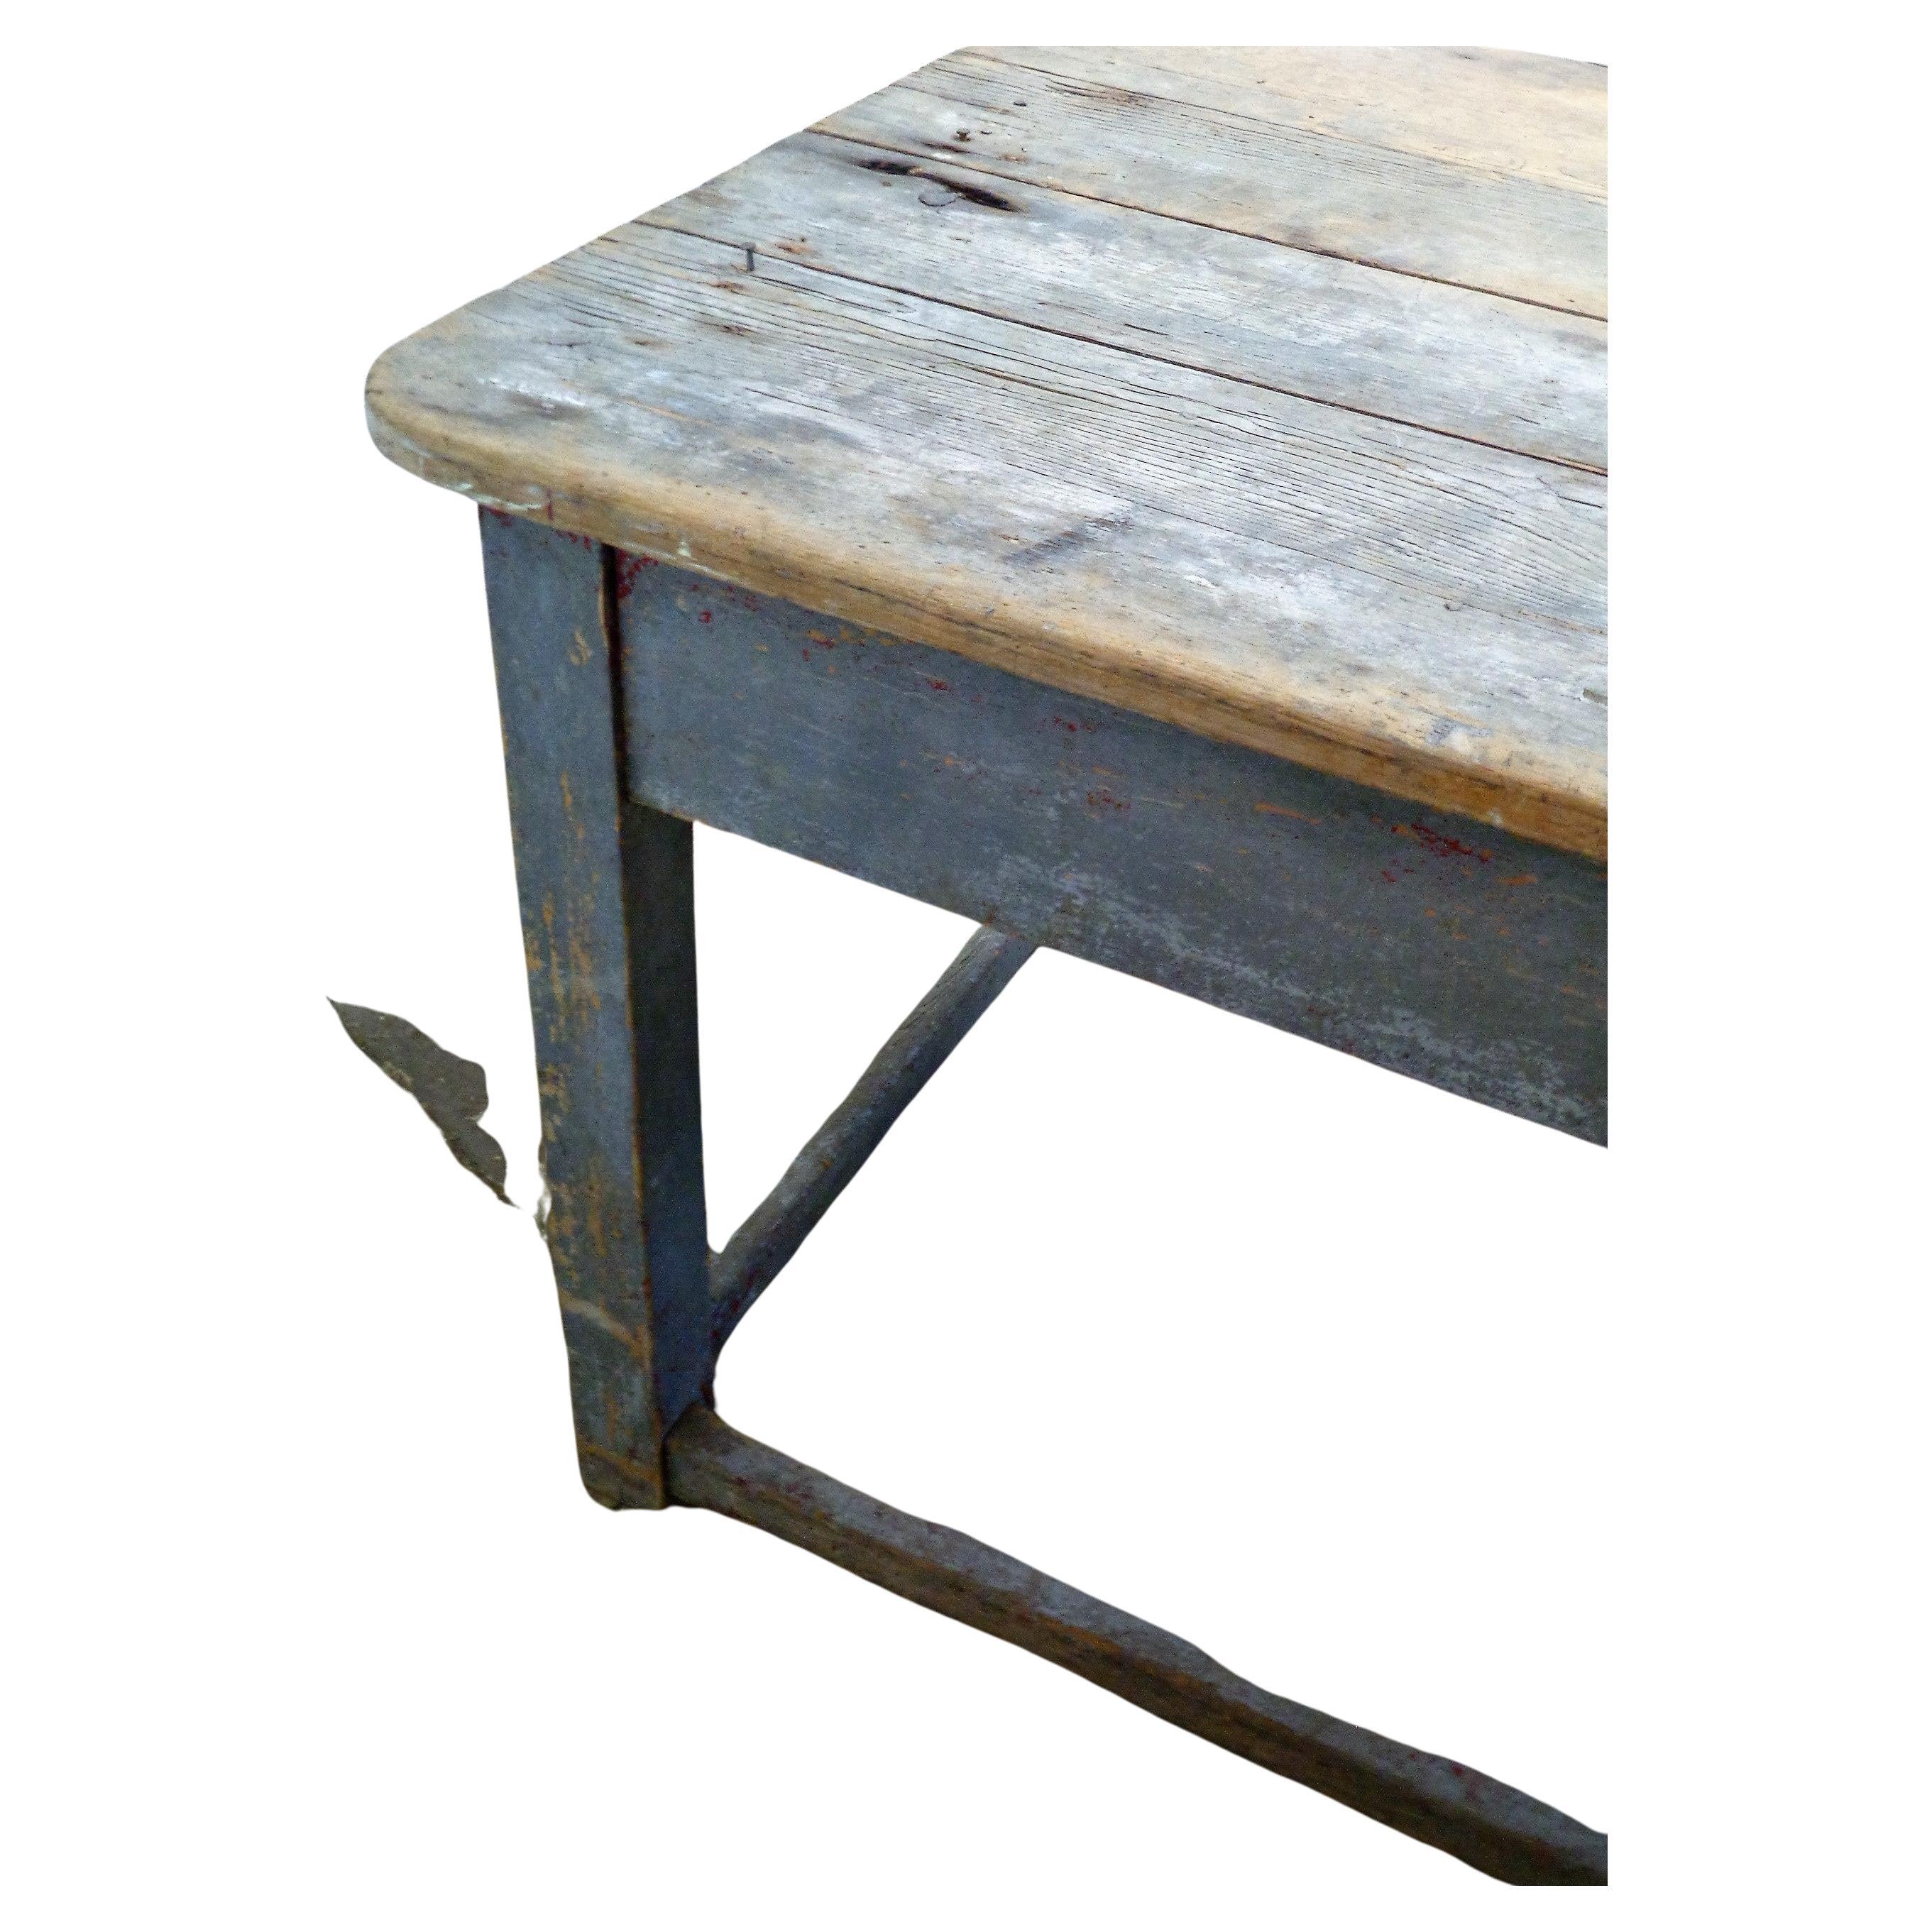  Early 19th Century Original Blue Painted Rustic Work Table  (Holz) im Angebot